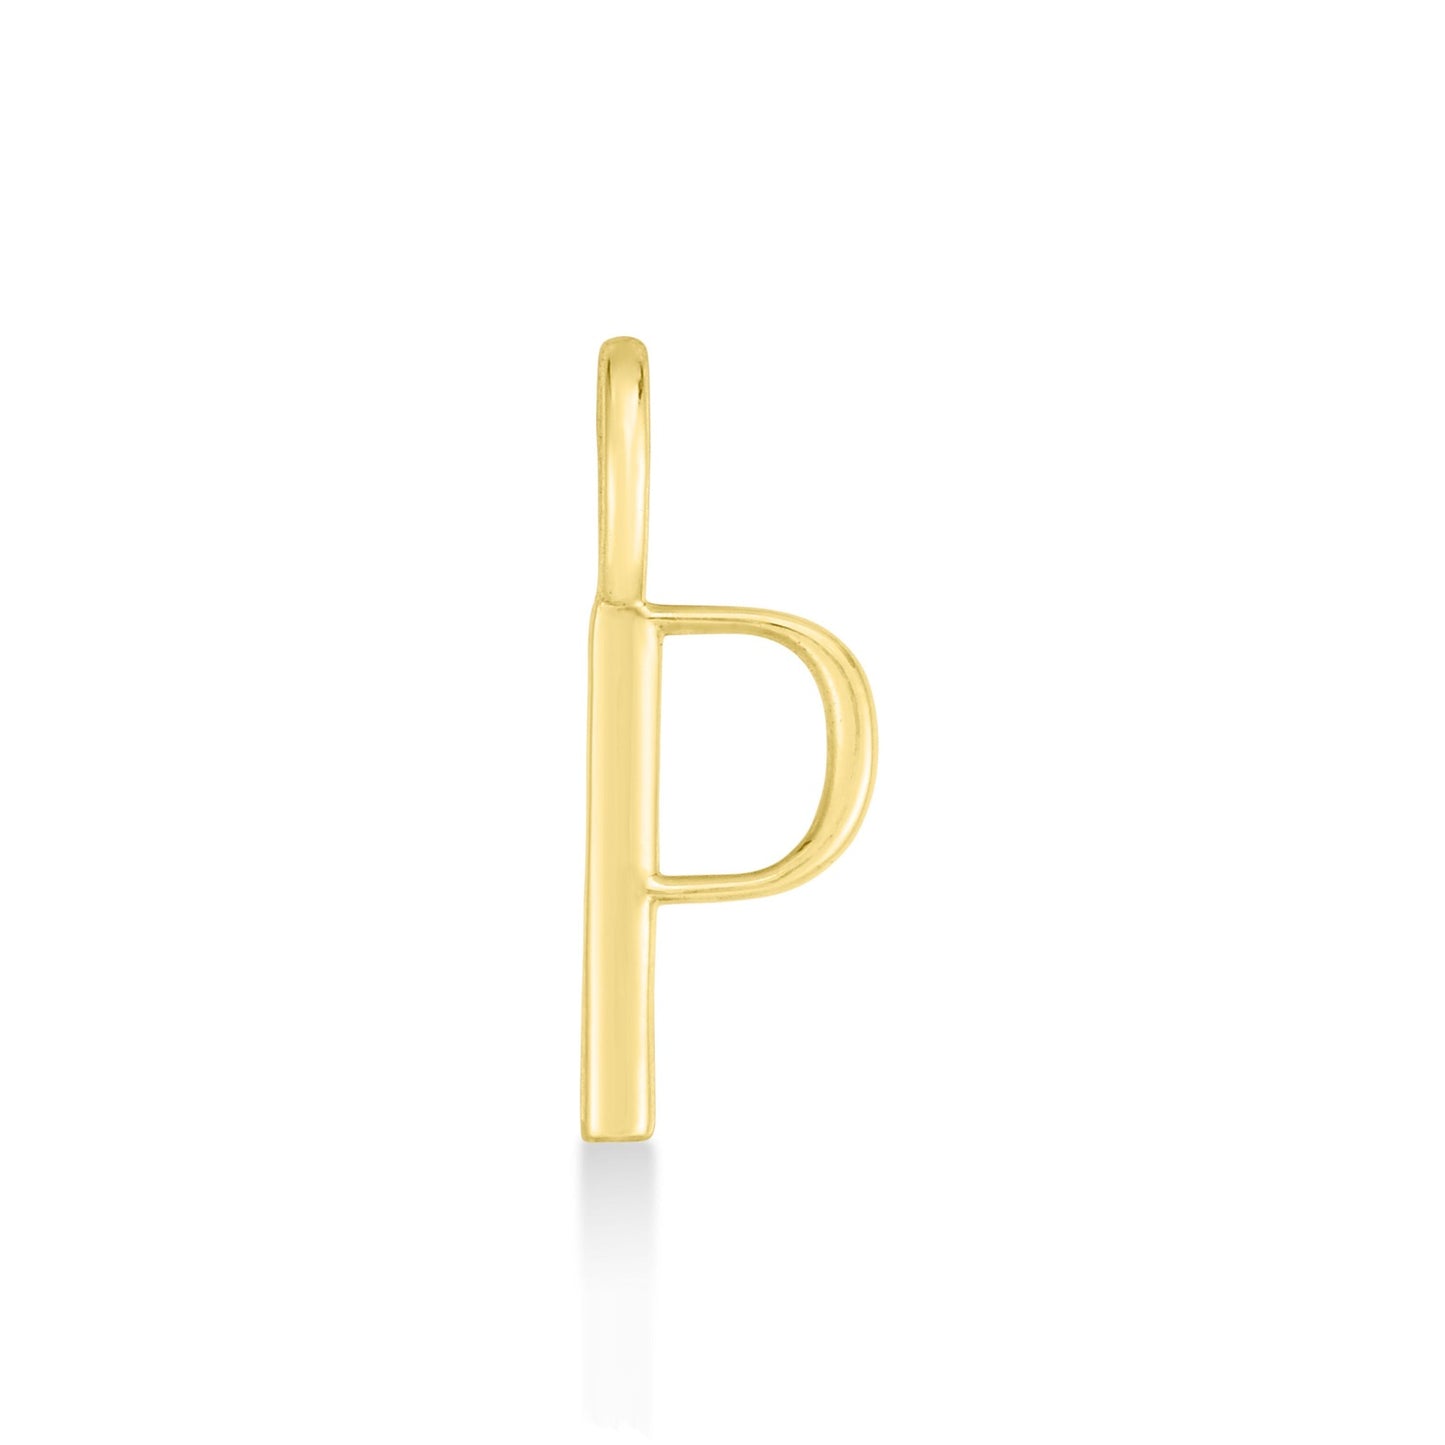 14K yellow gold P letter charm. 